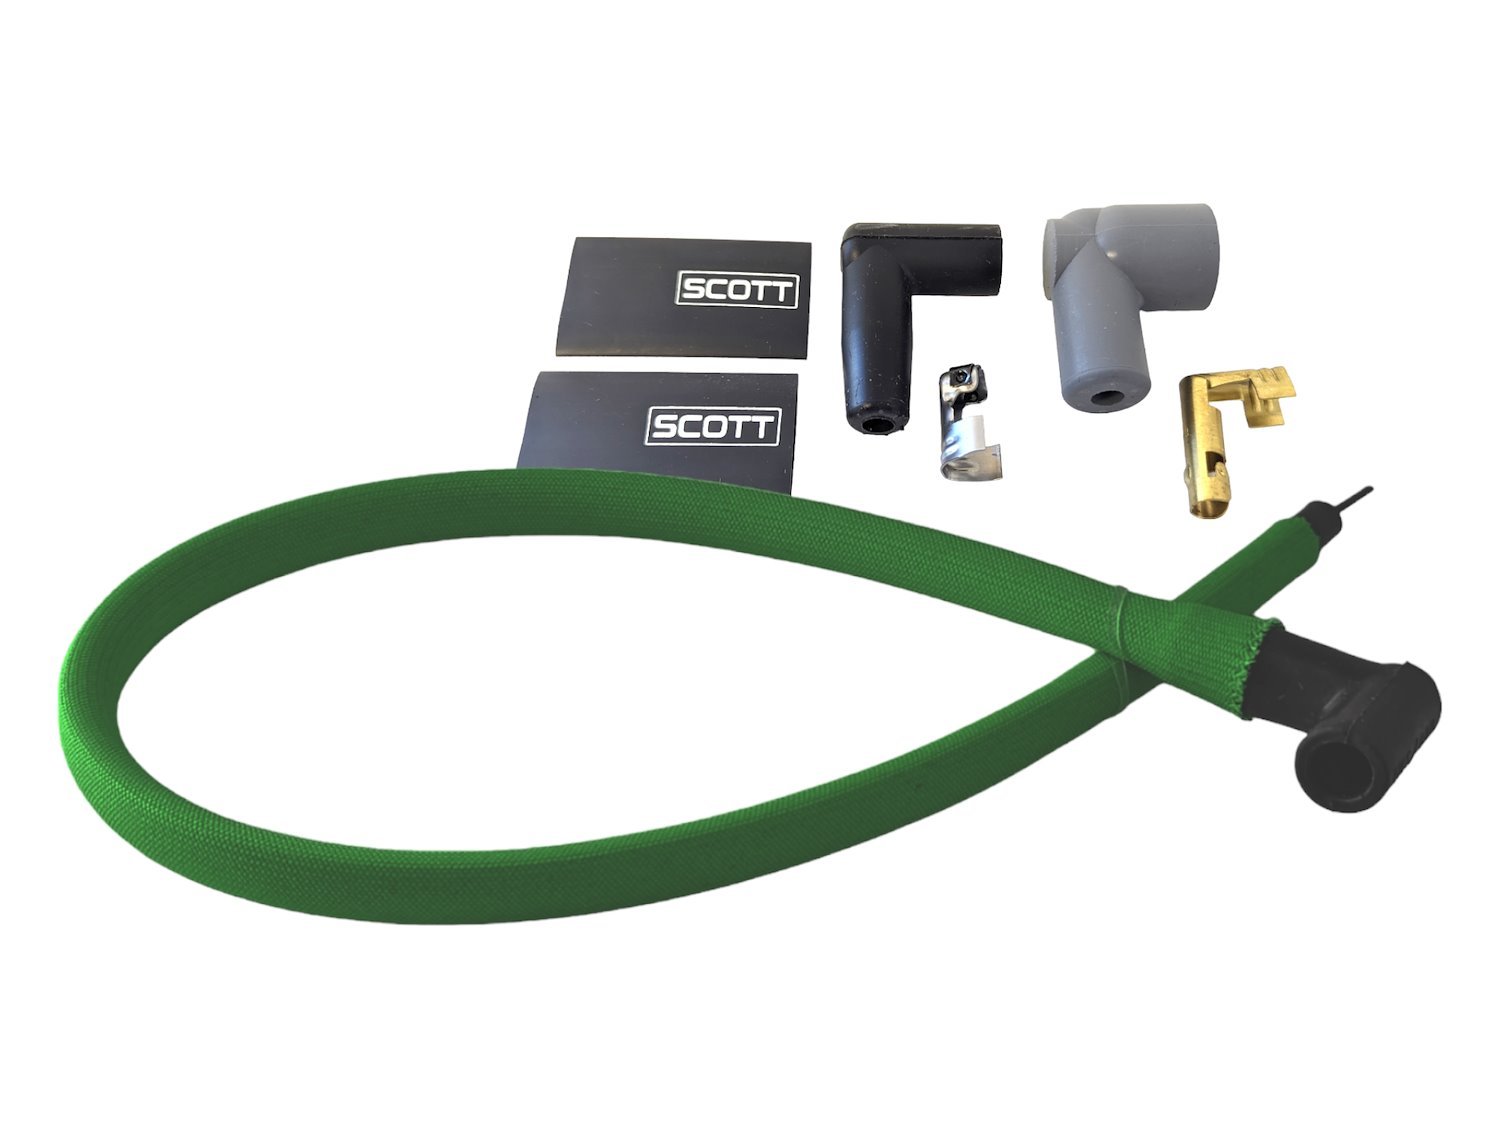 SPW-PSCW36-4 36 in. High-Performance Fiberglass-Oversleeved Coil Wire Kit for Universal Coil Wire Kits [Green]